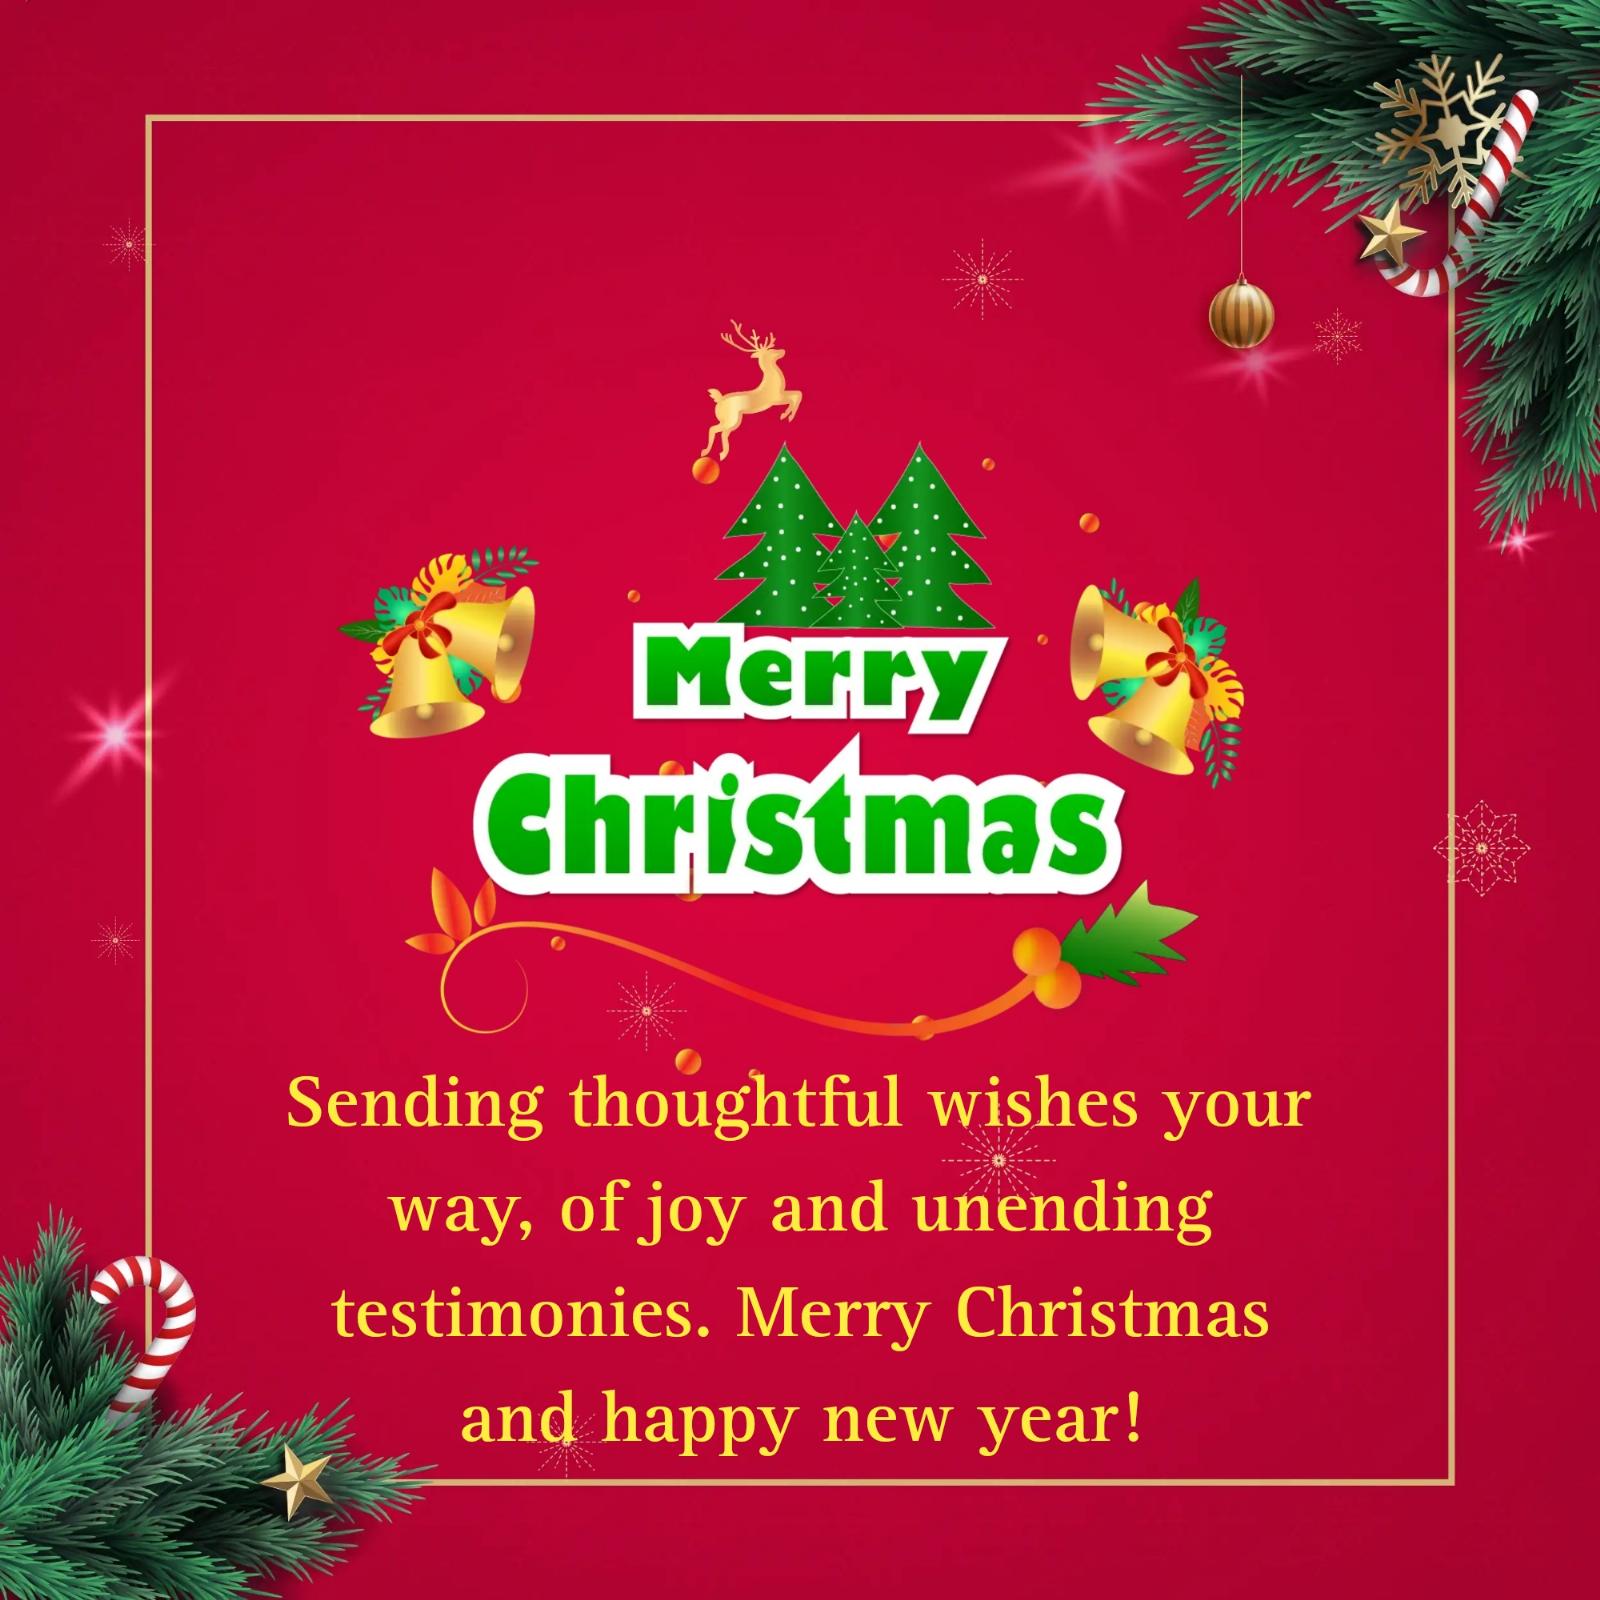 Sending thoughtful wishes your way of joy